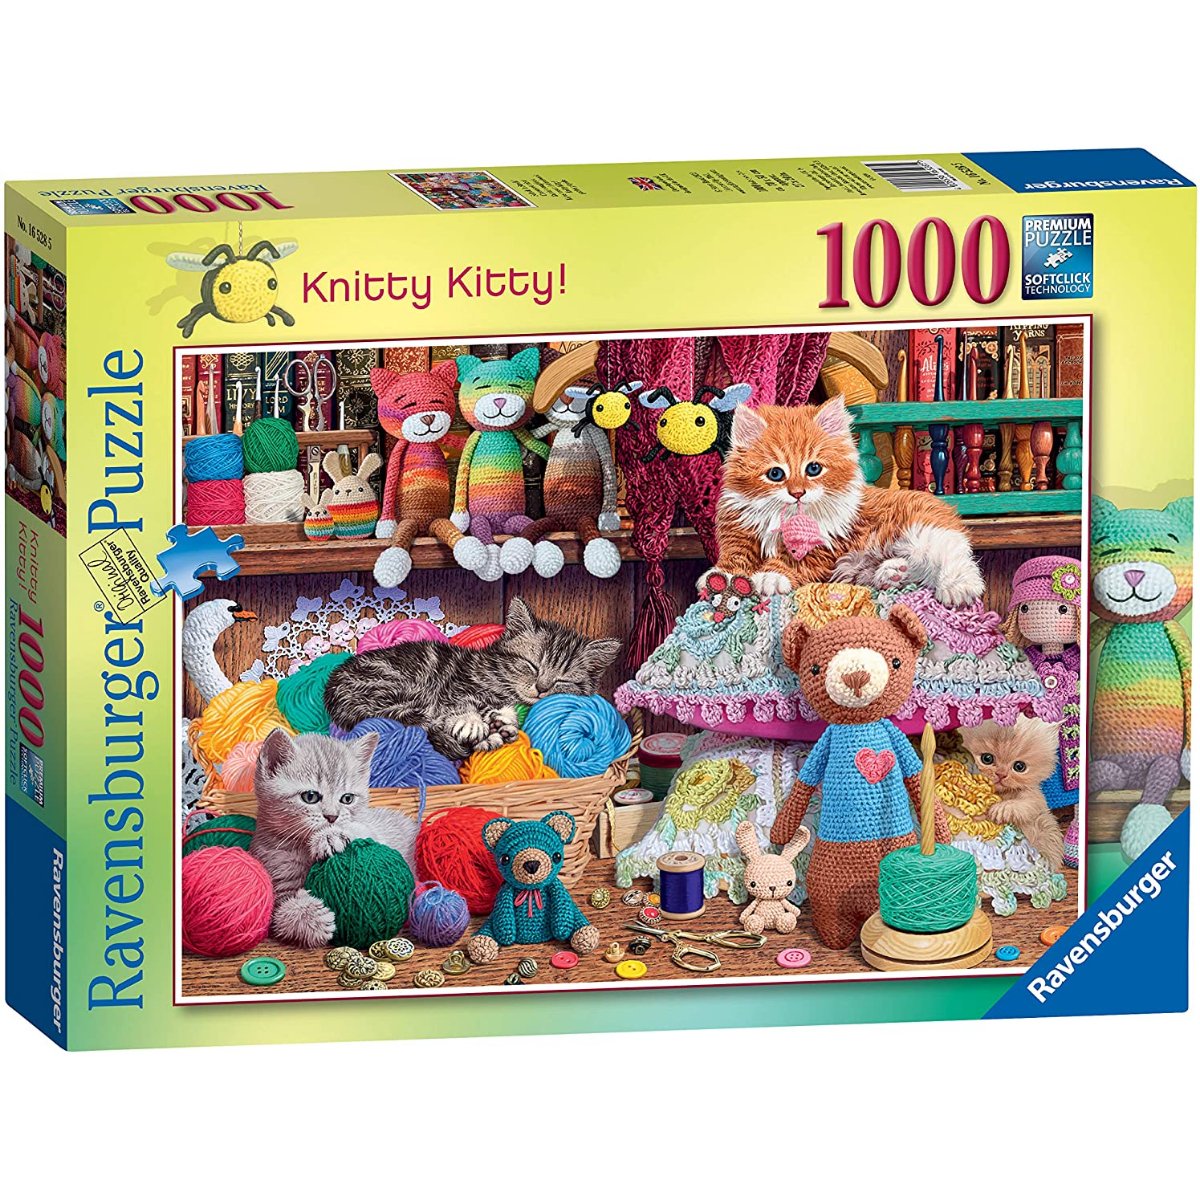 Ravensburger Knitty Kitty! 1000 Piece Jigsaw Puzzle - Phillips Hobbies